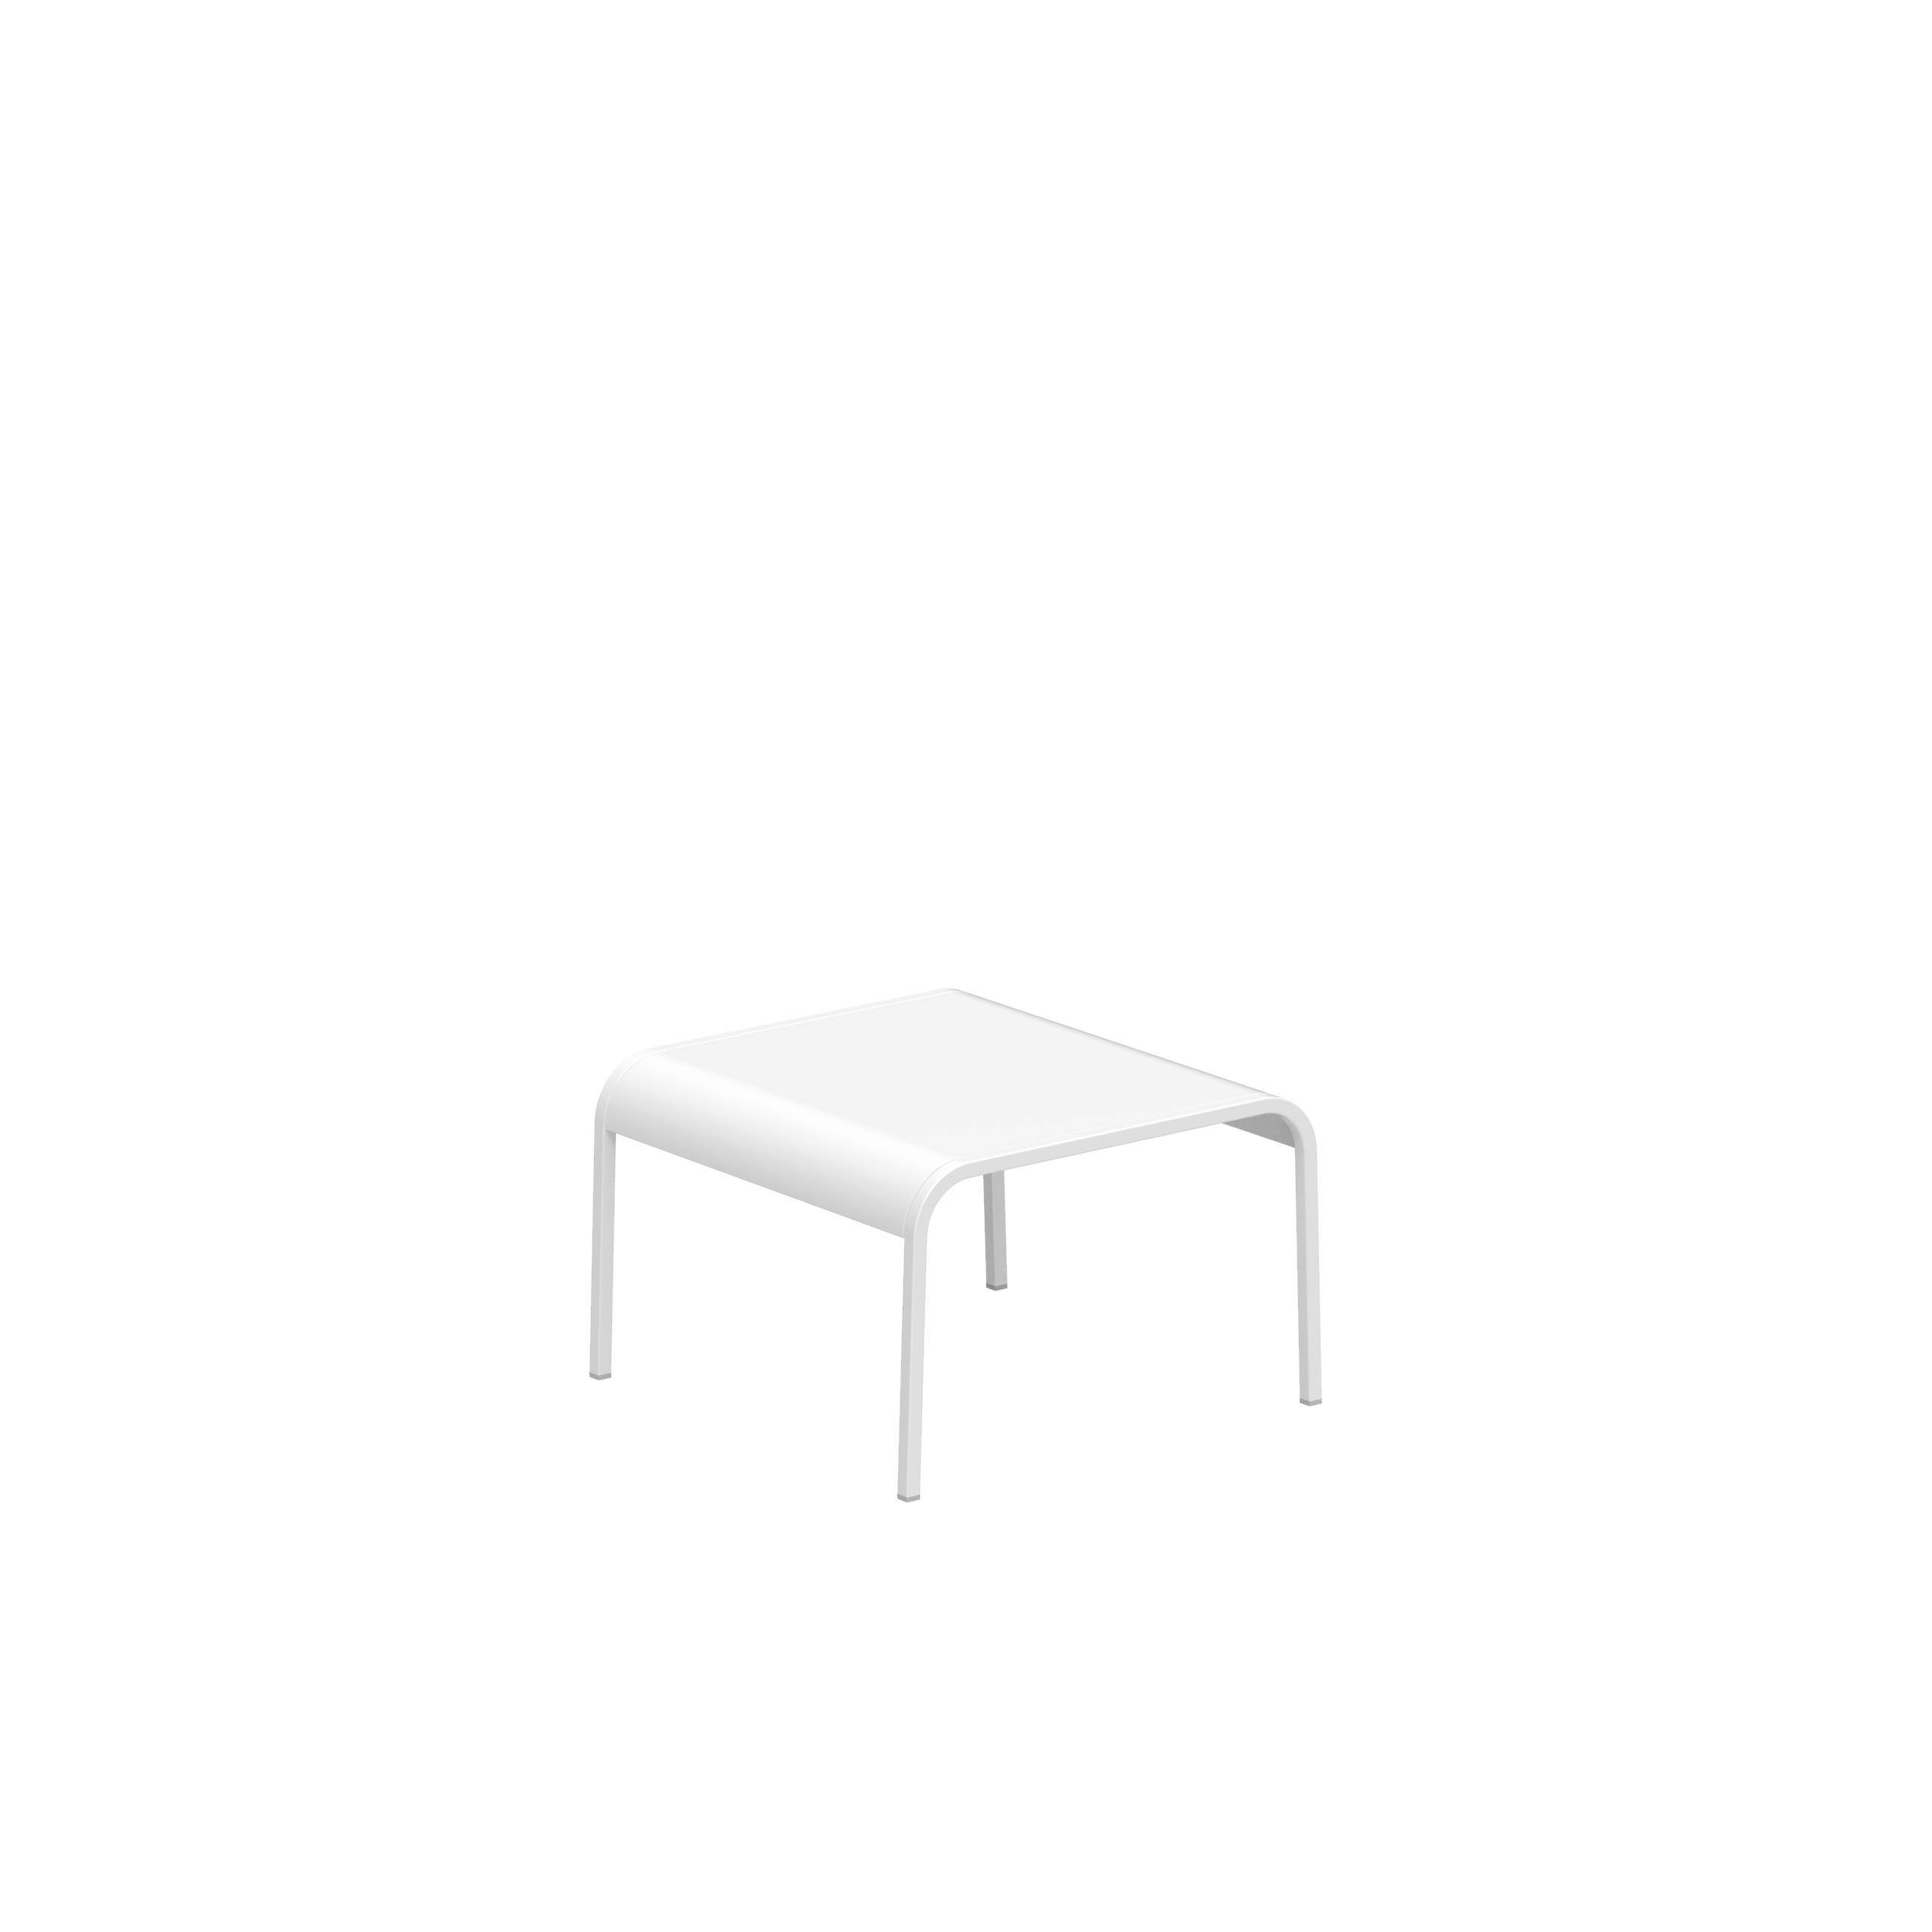 Qt50 Side Table 50x50cm White With Alu Top White